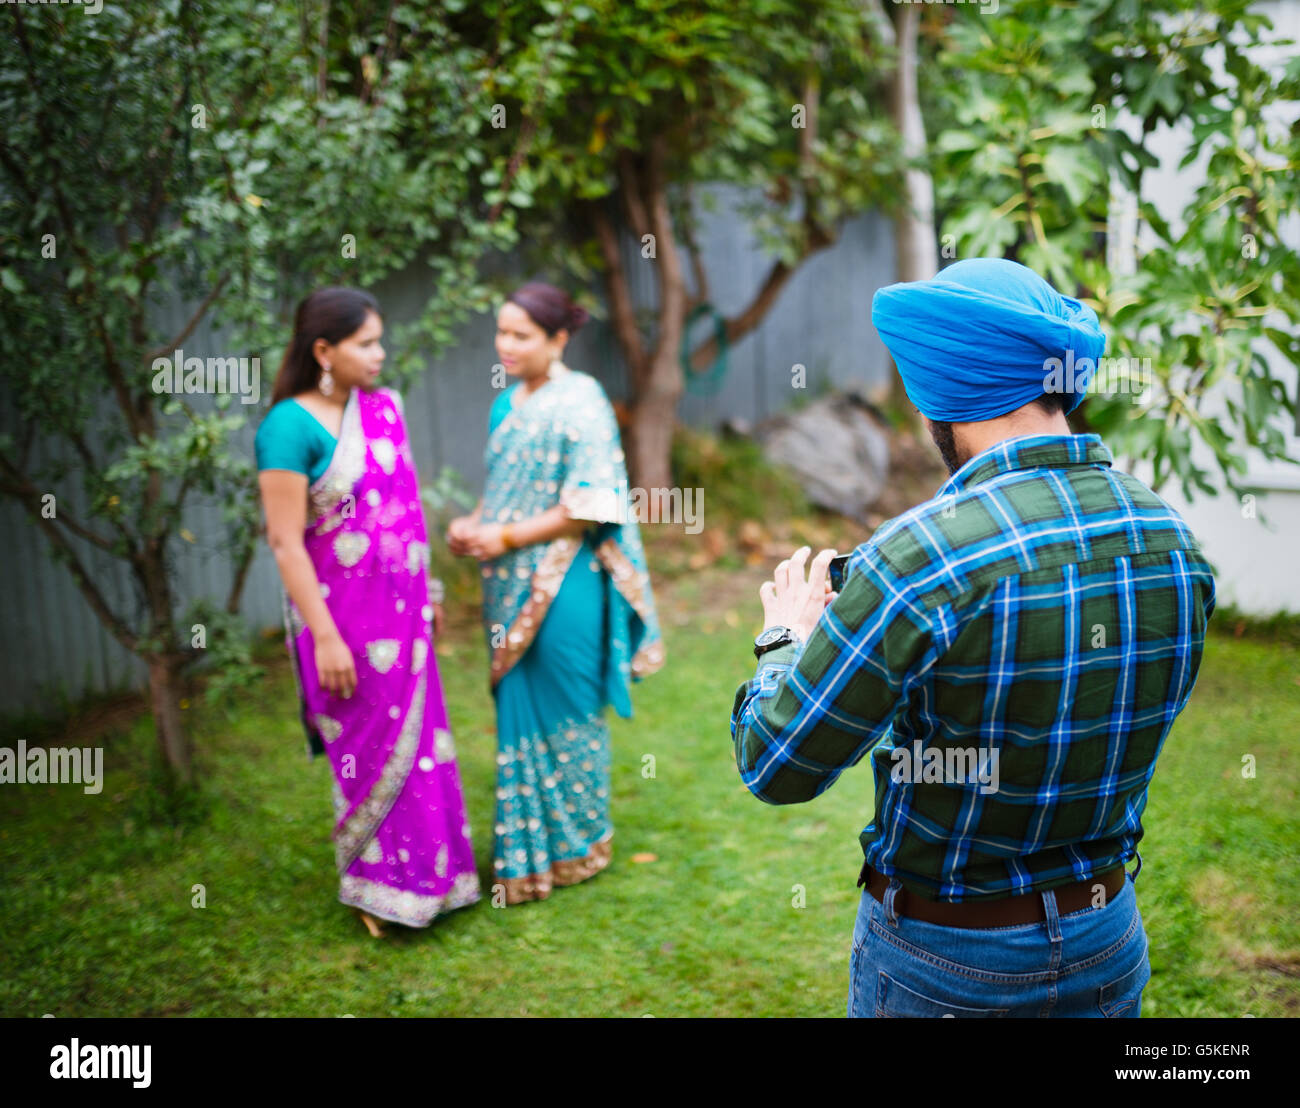 Man photographing women in traditional Indian dresses Stock Photo